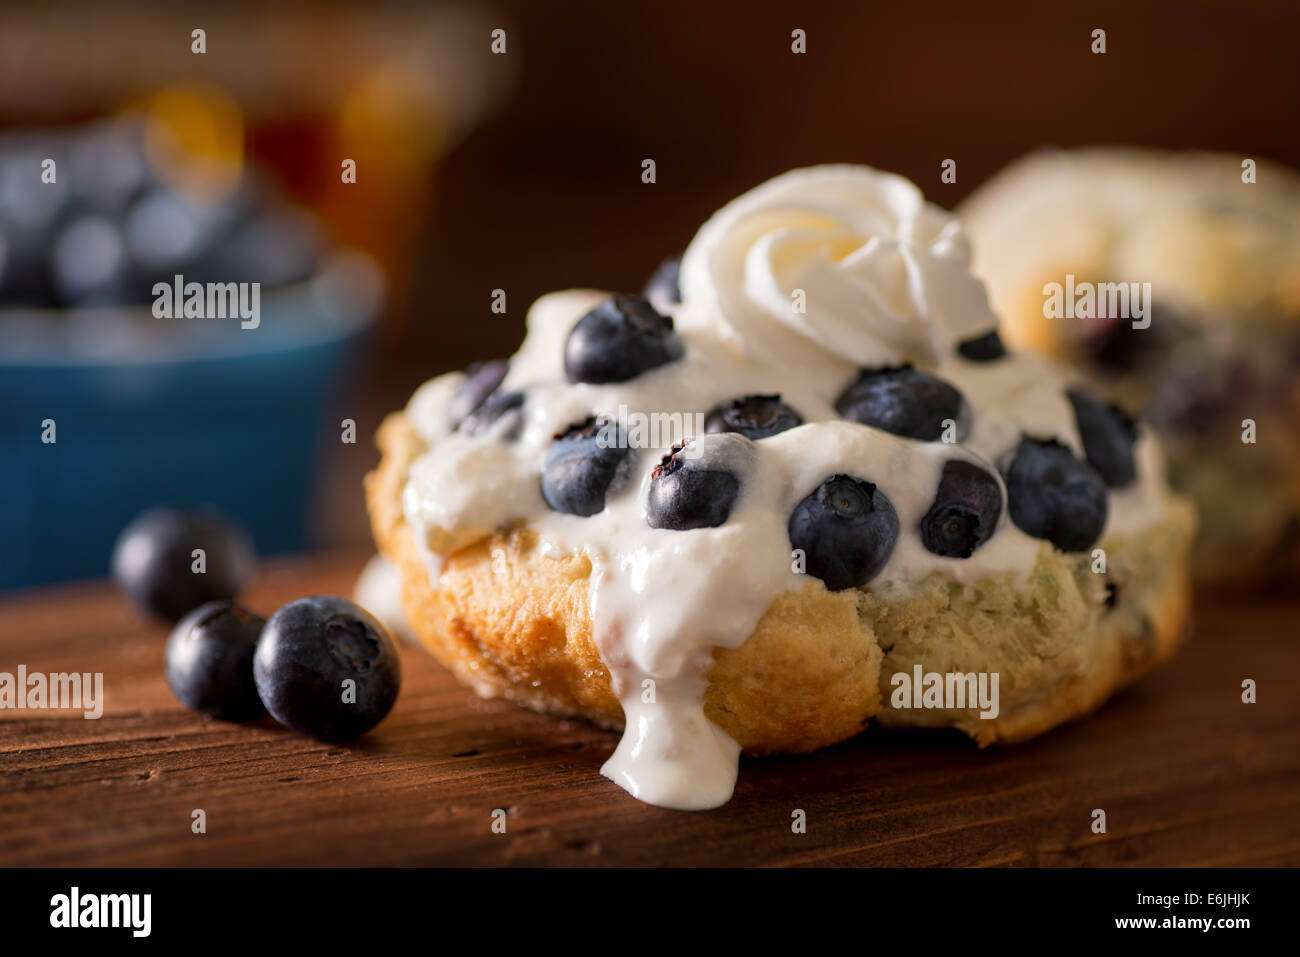 A delicious homemade blueberry shortcake on scones with cream and whipped cream. Stock Photo